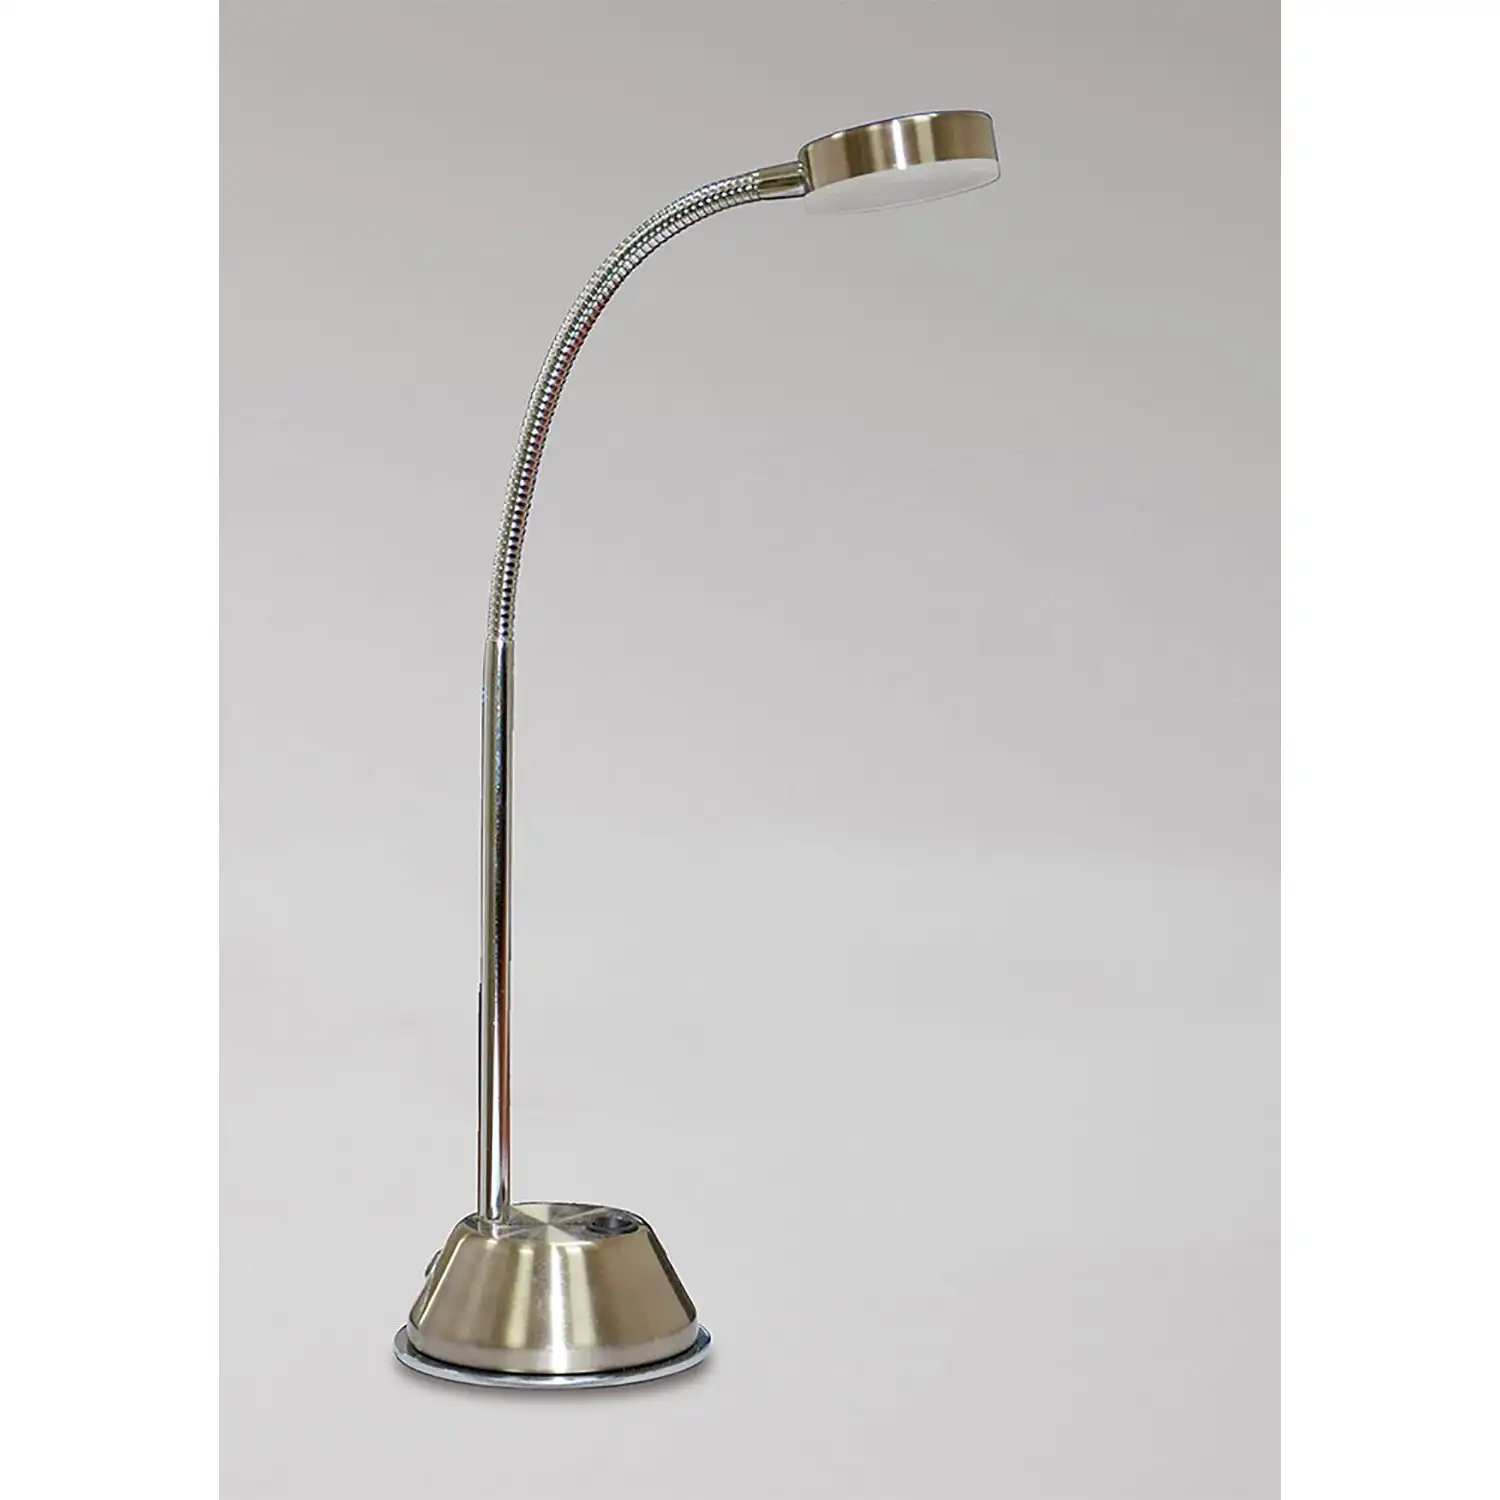 Tobias Table Lamp 1 Light 3W LED 3000K, 300lm, Satin Nickel Frosted Acrylic Polished Chrome, 3yrs Warranty